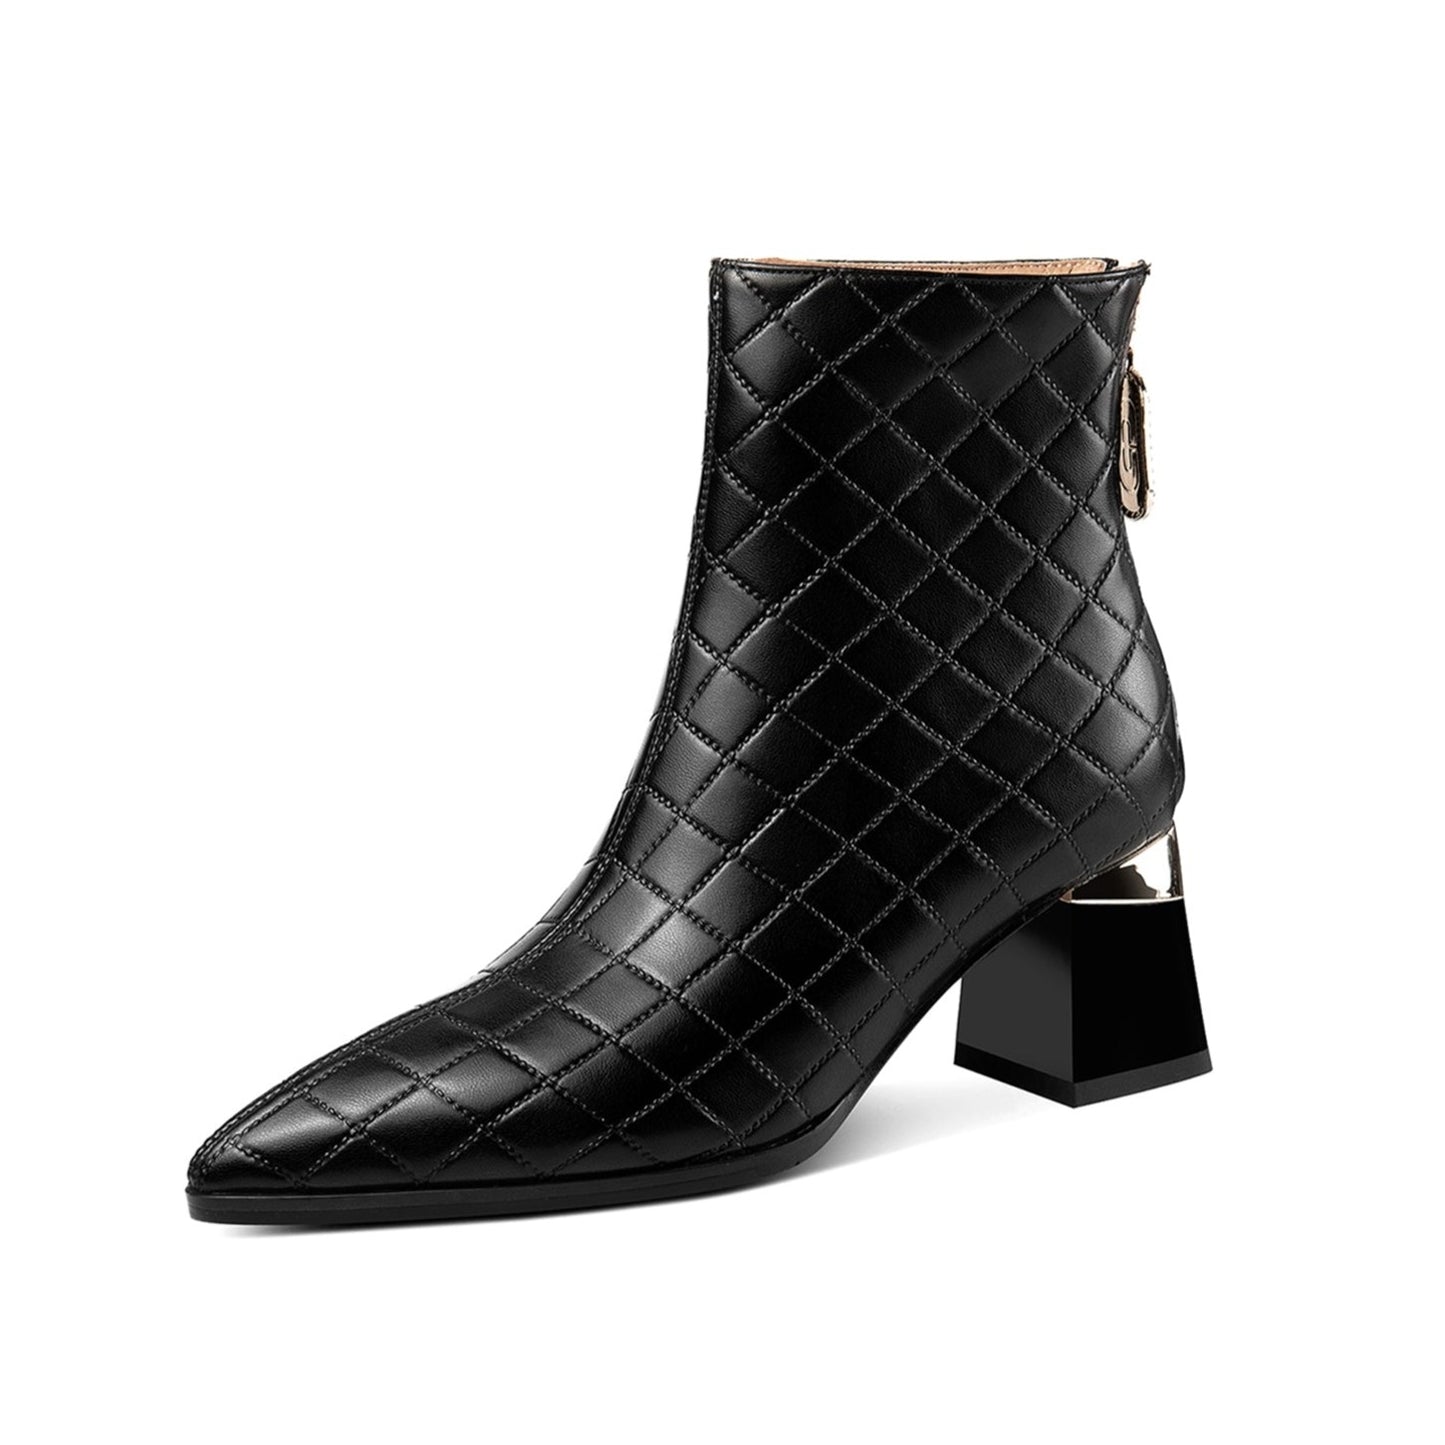 TinaCus Genuine Leather Women's Handmade Pointed Toe Checkered Chunky Heel Back Zip Up Ankle Boots